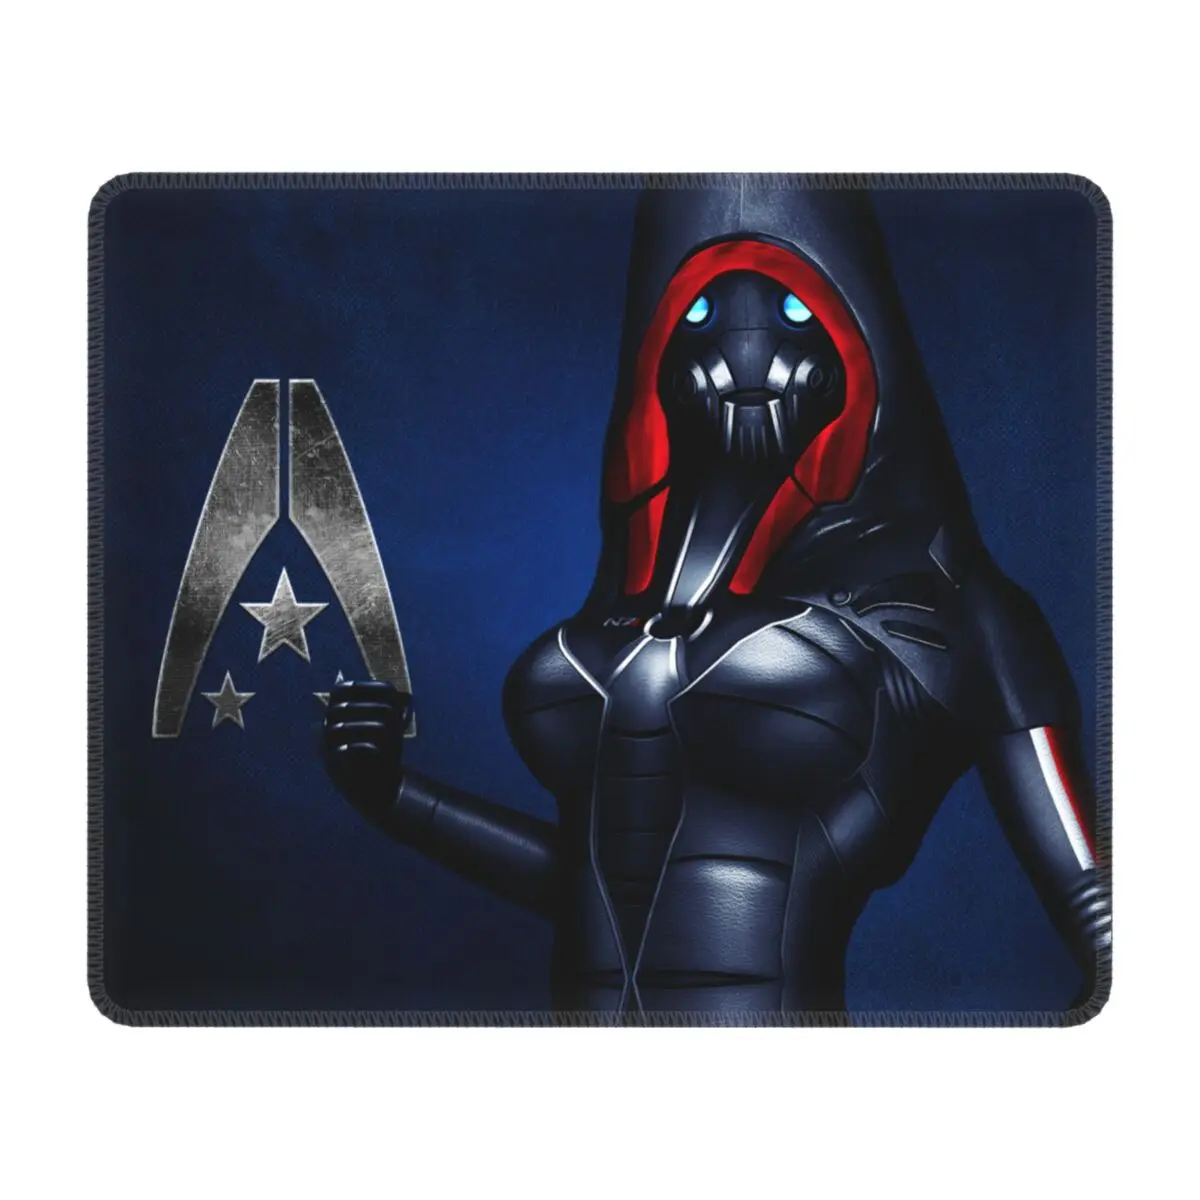 

N7 Mass Effect Jacob Taylor Gamer Mouse Mat Non-Slip Rubber Lockedge Mousepad Office Laptop Computer PC Video Game Mouse Pad